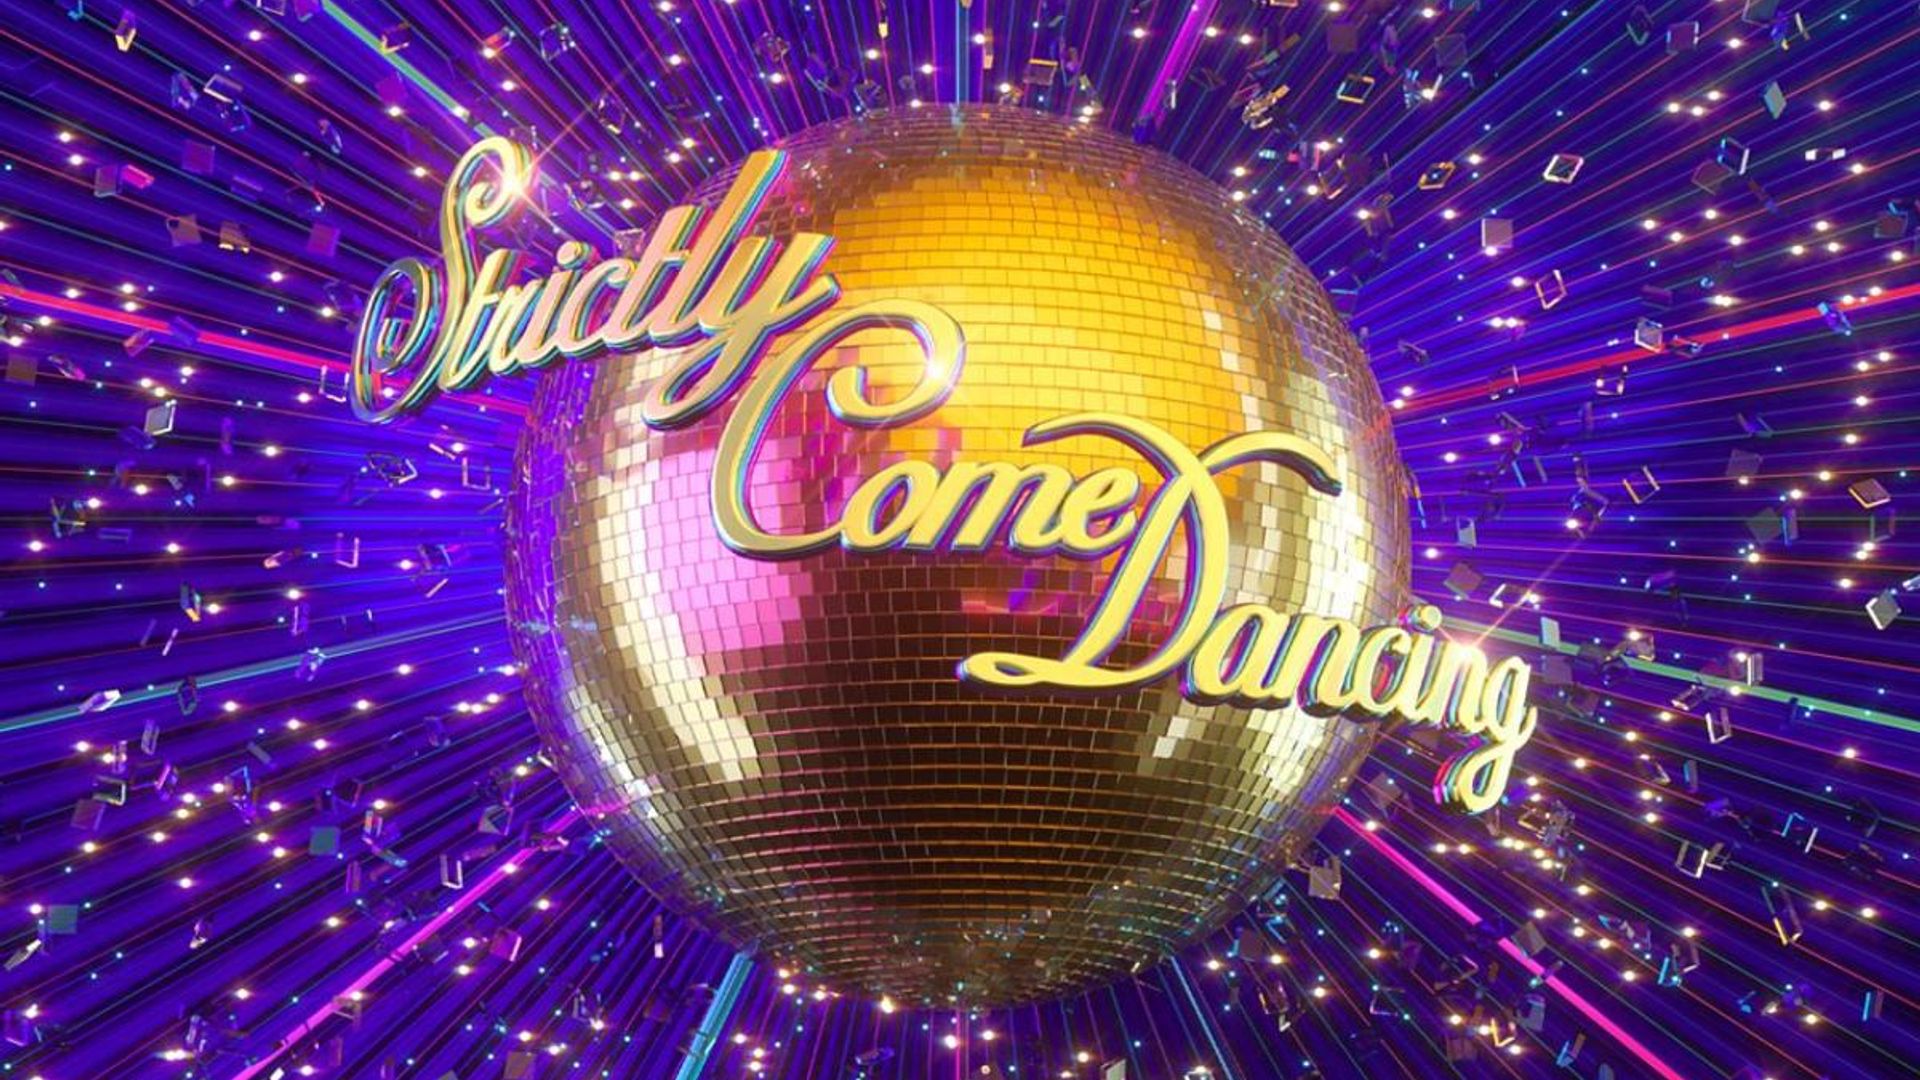 Strictly Come Dancing announces touching tribute to the late Caroline Flack 